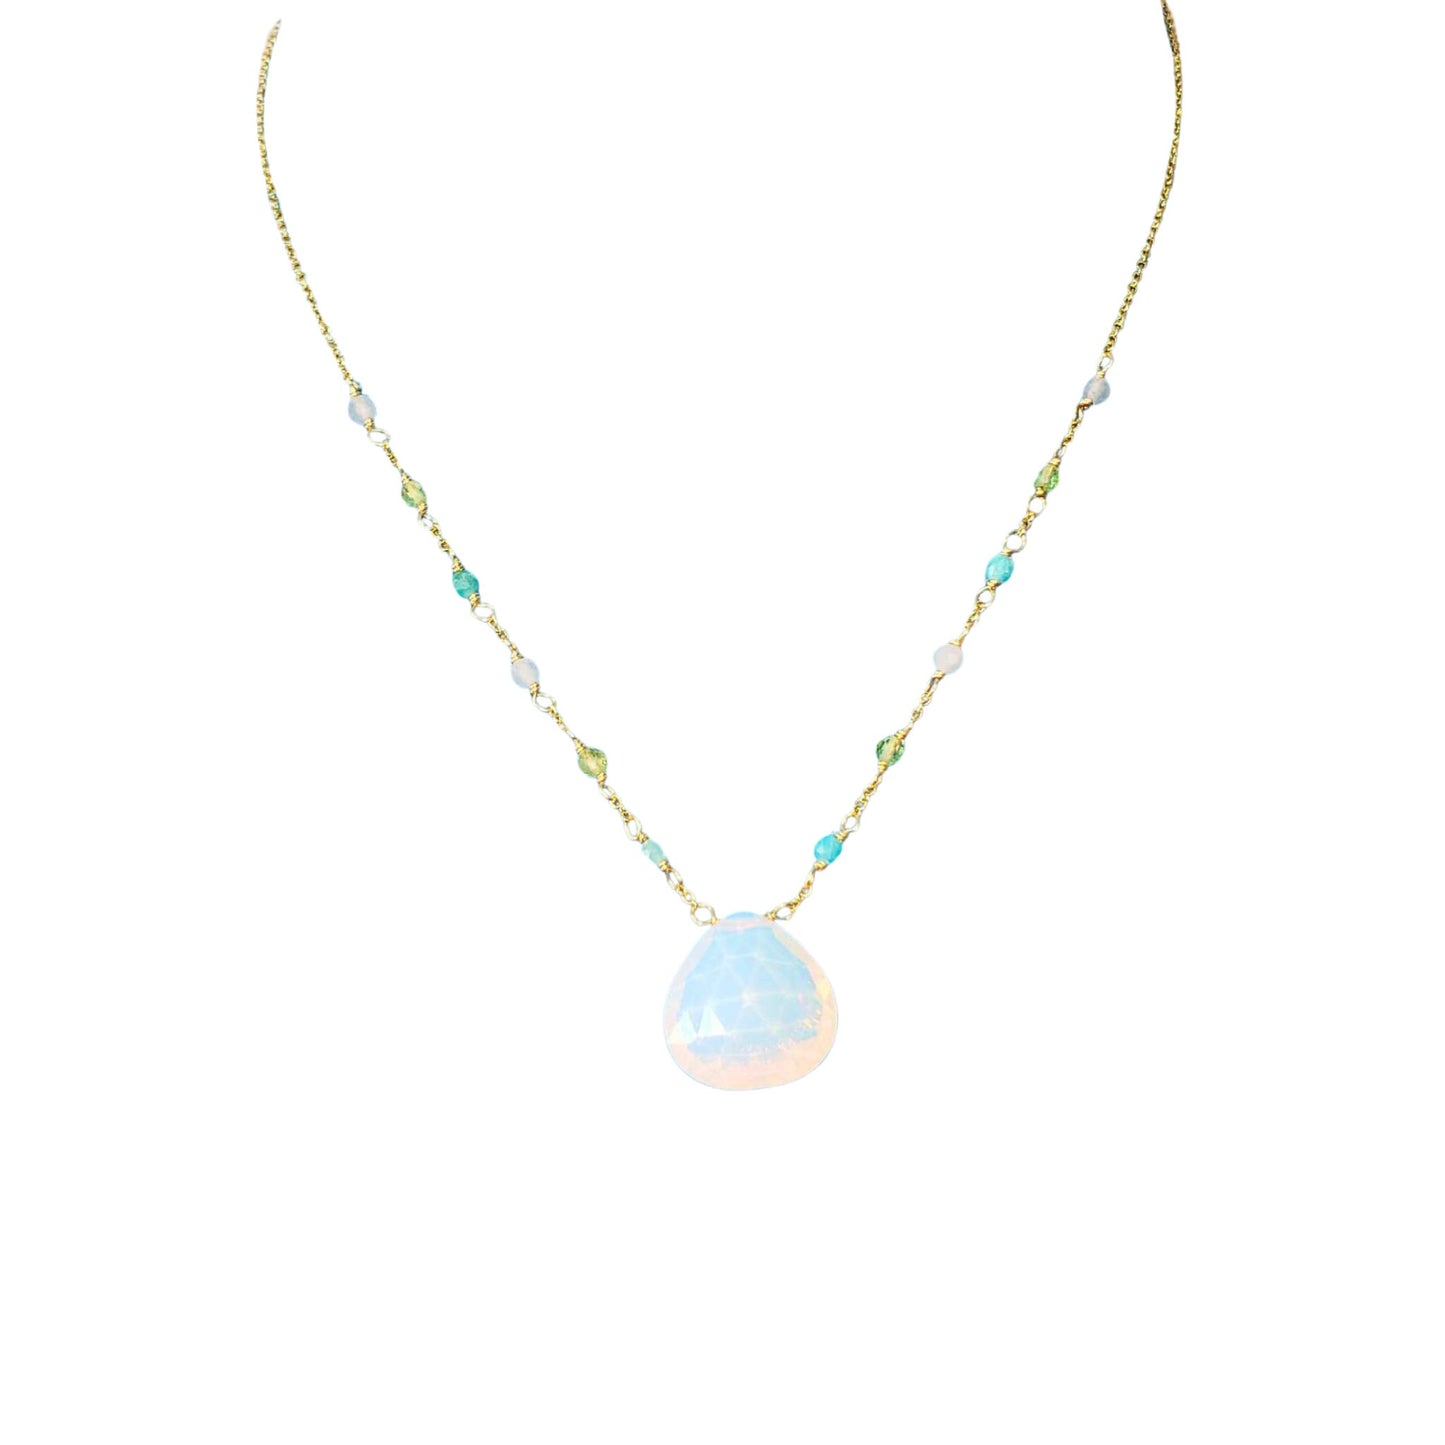 Opalite and Gemstone Necklace